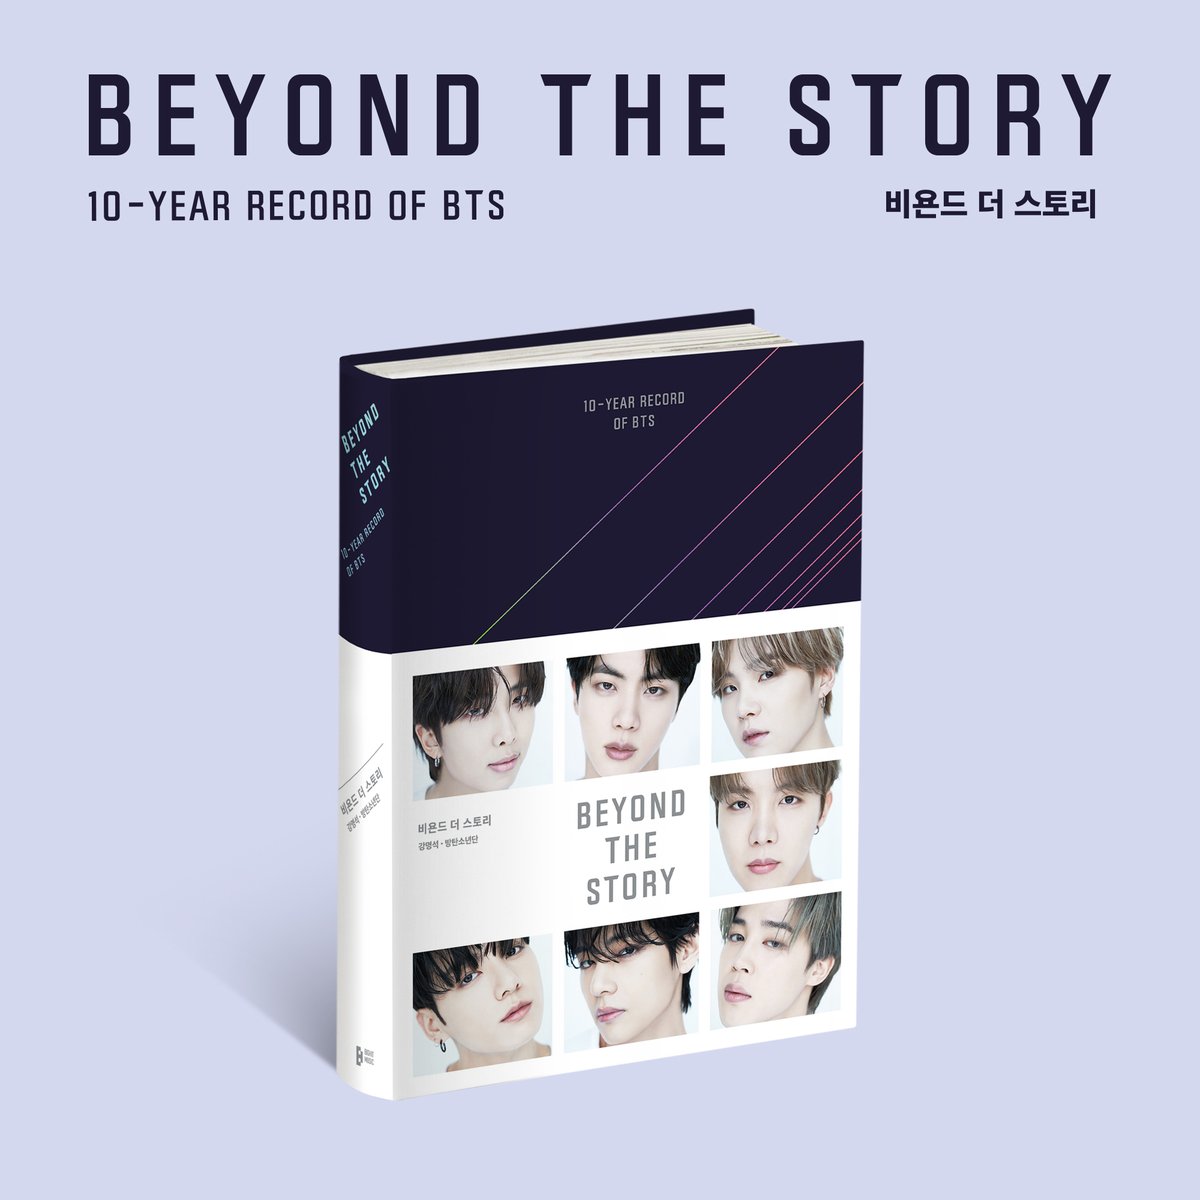 10 years after taking their first steps together, @bts_bighit announce the book that takes you inside their world. Featuring behind-the-scenes stories, unreleased photos, BEYOND THE STORY is everything about BTS in one volume. Preorder with 50% off RRP: bit.ly/3p4IIYe